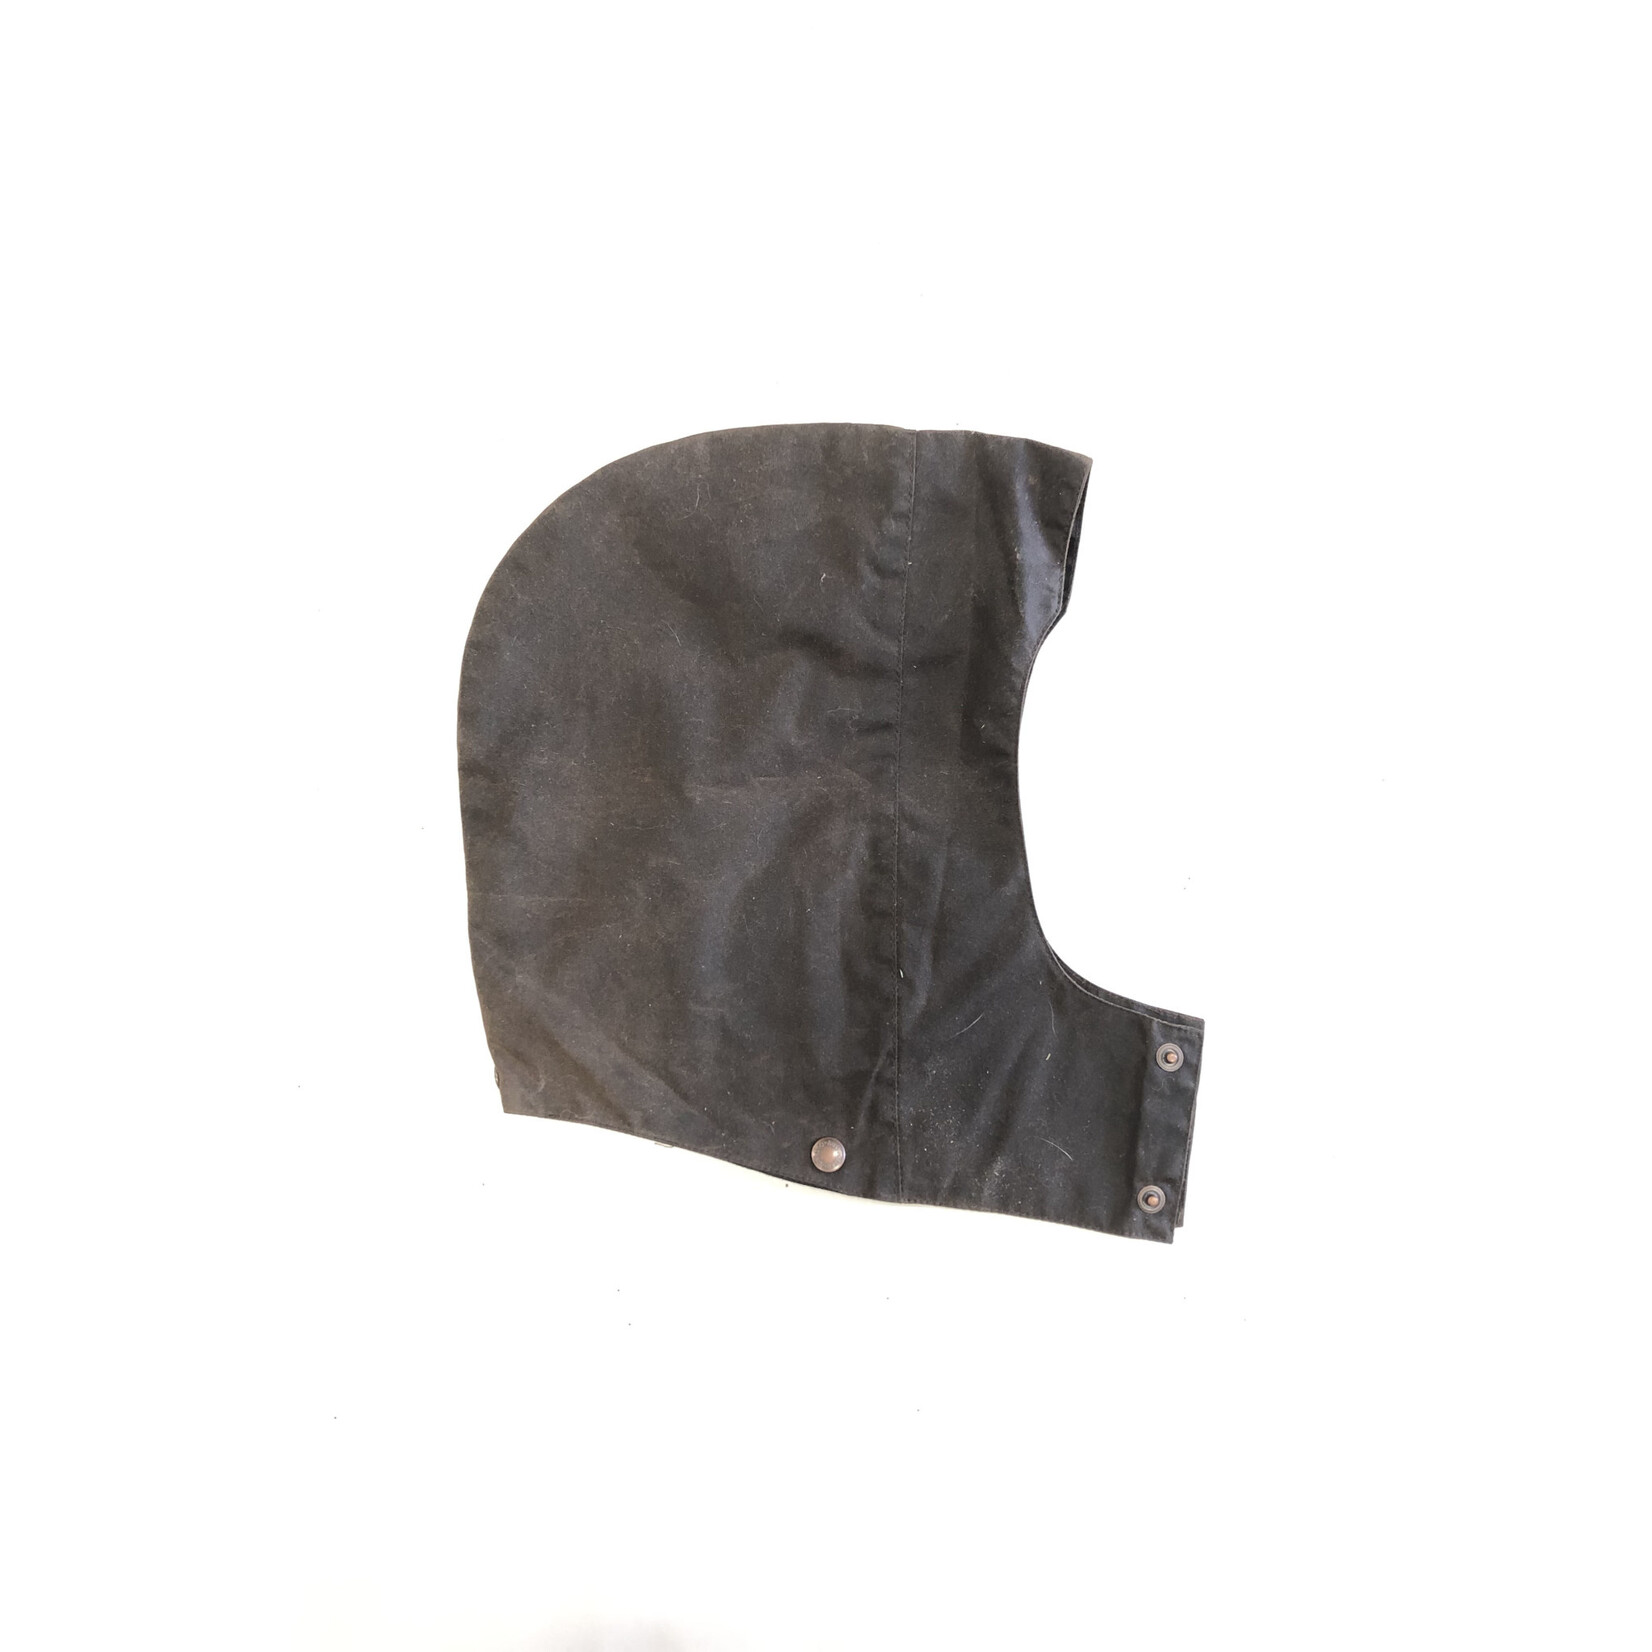 Outback Trading Company Oilskin Hood Brown Small